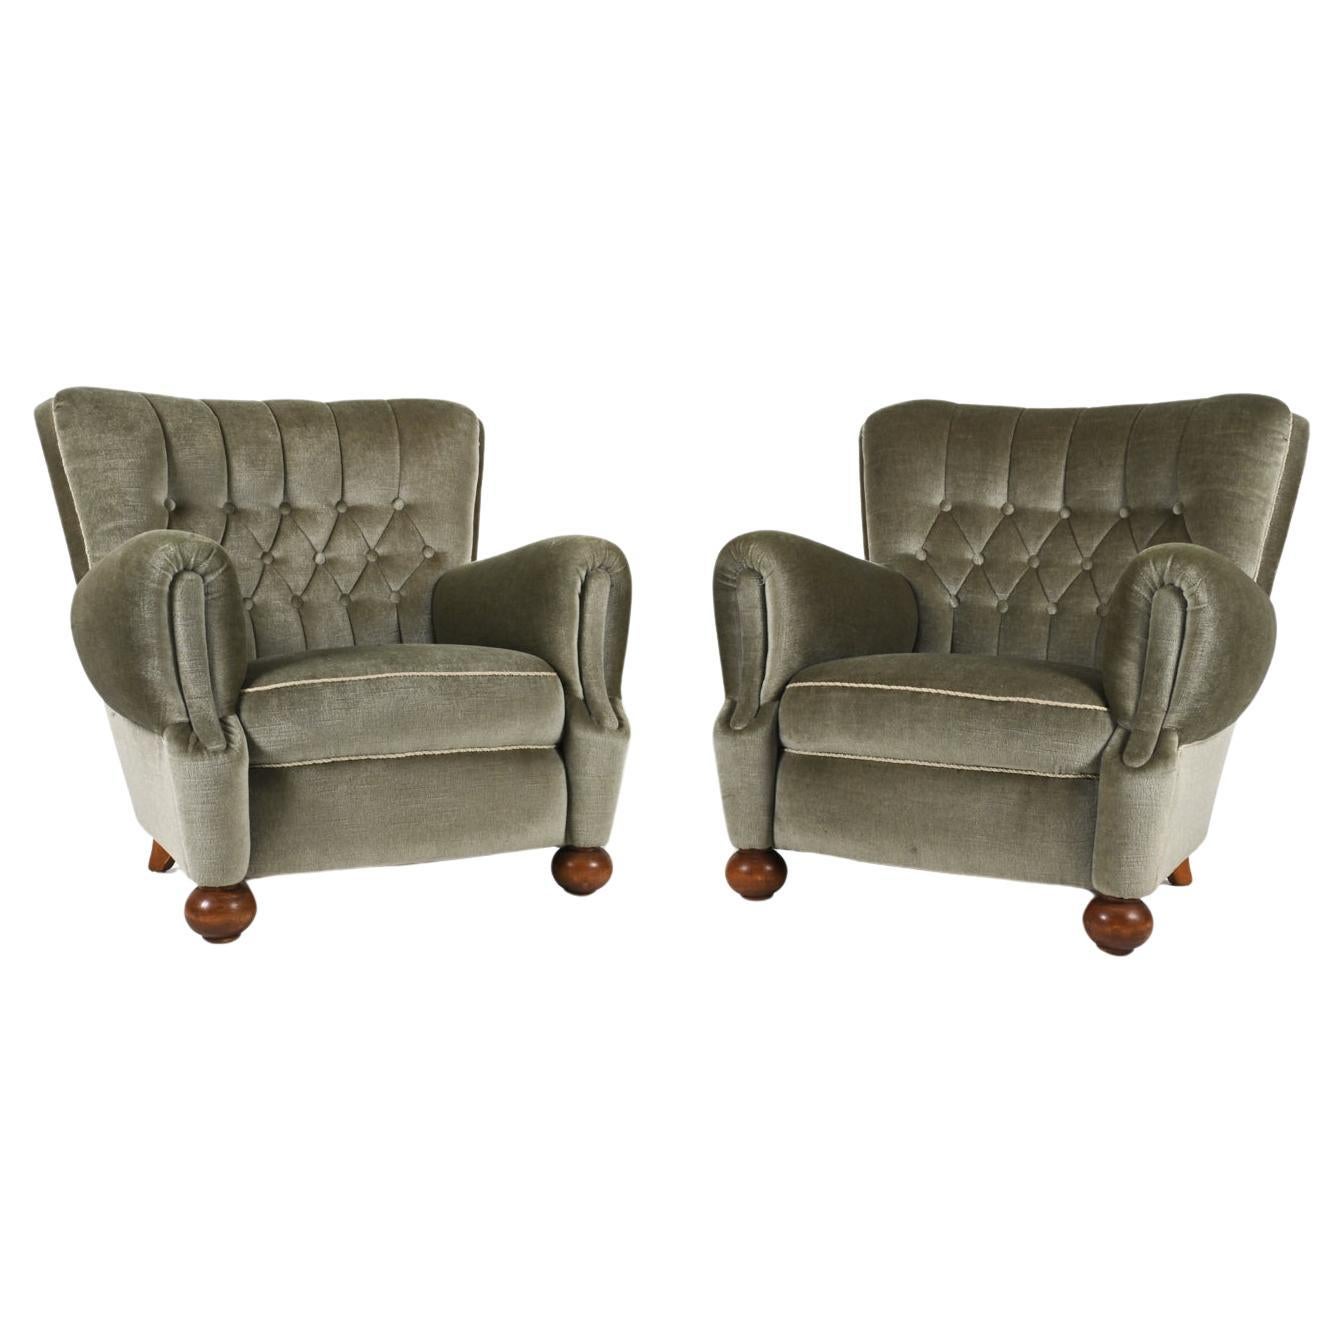 Pair of European Roll-Arm Club Chairs in Mohair and Beech, c. 1940's For Sale